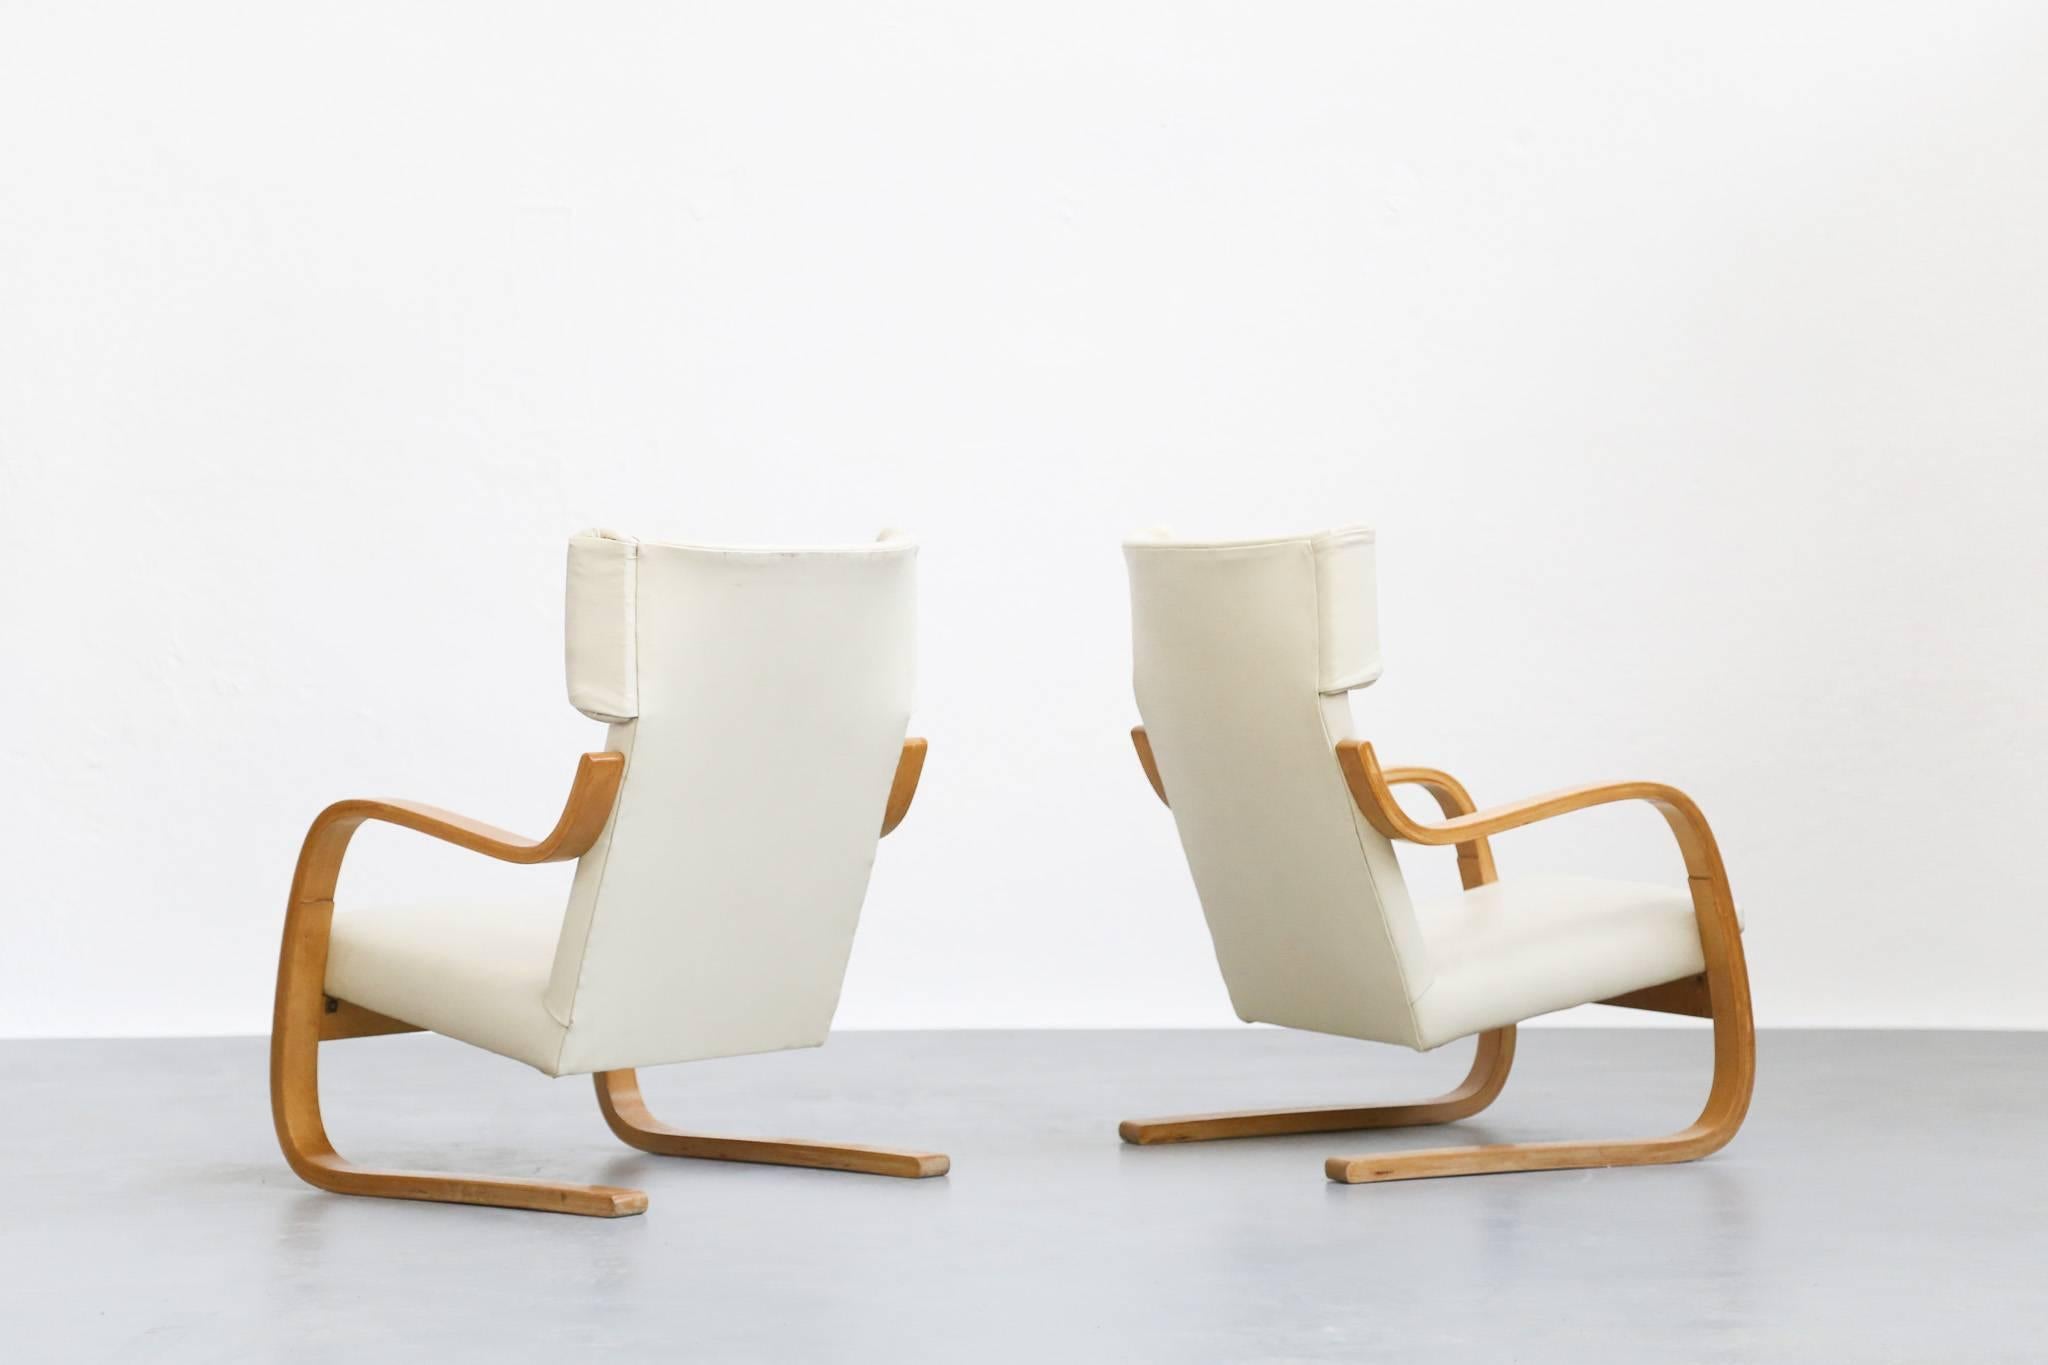 Finnish Pair of Lounge Chairs Model 401 by Alvar Aalto, 1935 Finland Design